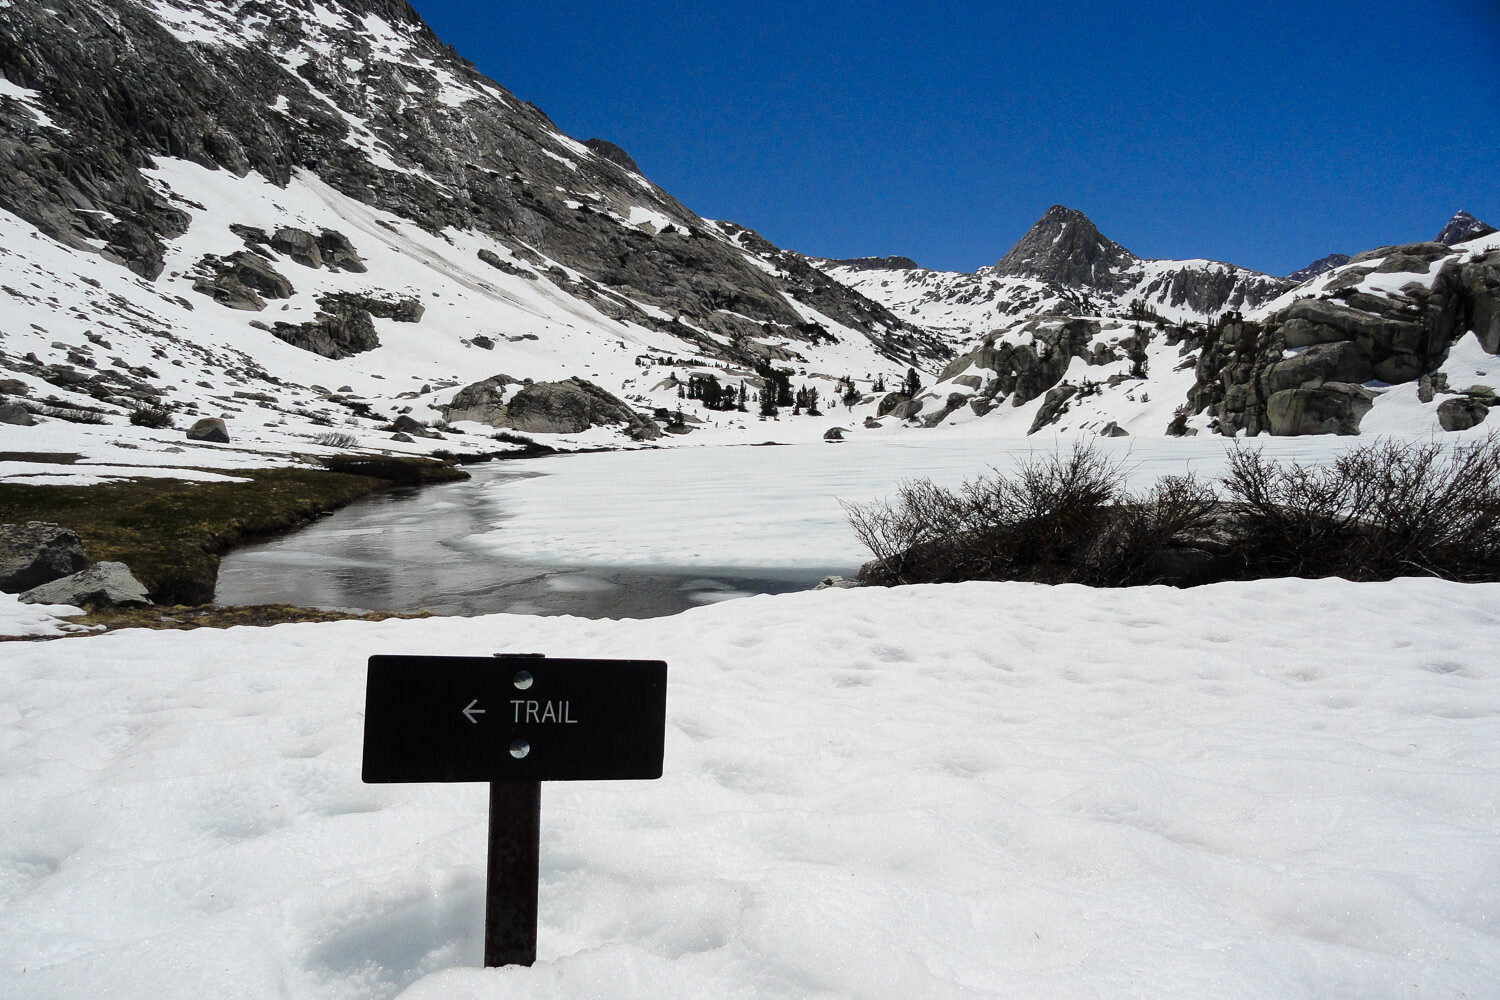 Deep Snow persists longer than usual in the Sierra Nevada